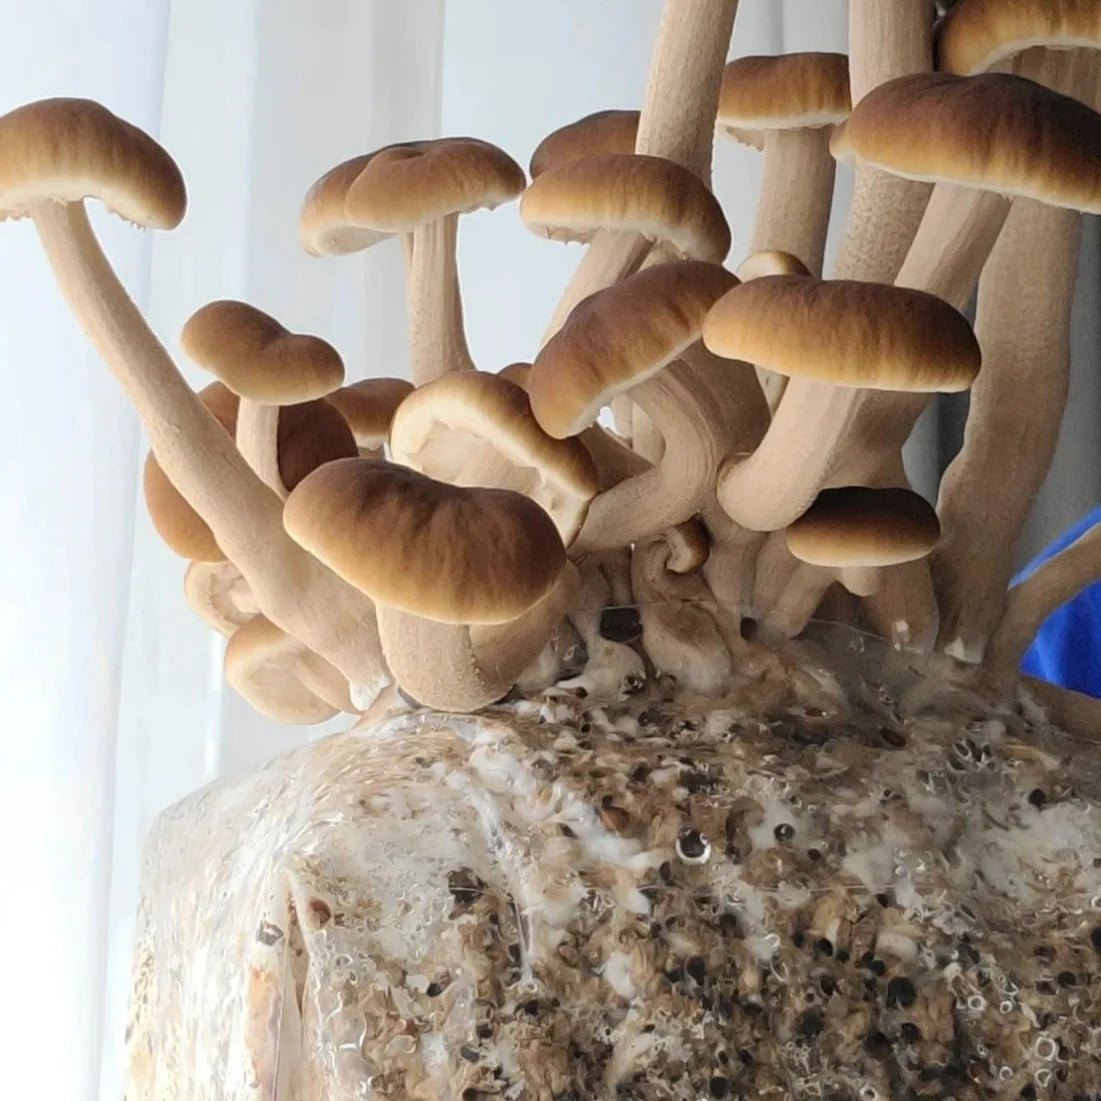 Growing Mushrooms Workshop - April 22nd from 1:00 pm - 2:30 pm. - Gift & Gather